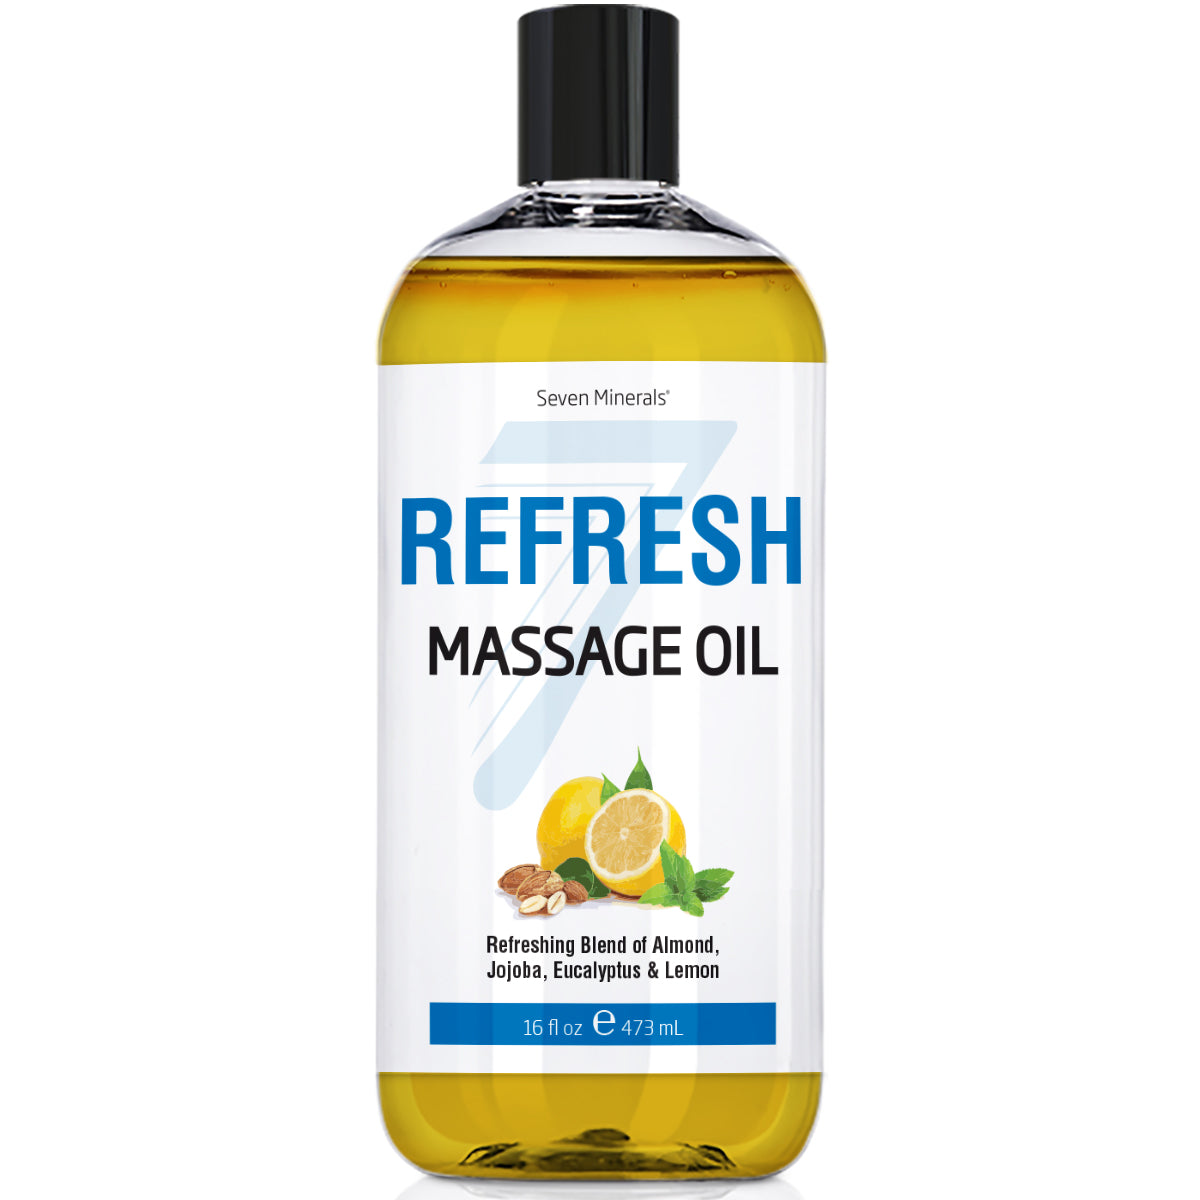 New Refreshing Massage Oil for Massage Therapy - Big 16oz Bottle - Ideal for Professional or at-Home Body Massage. Soothing Natural Blend of Almond, Jojoba, Eucalyptus, Lemon, & Vitamin E